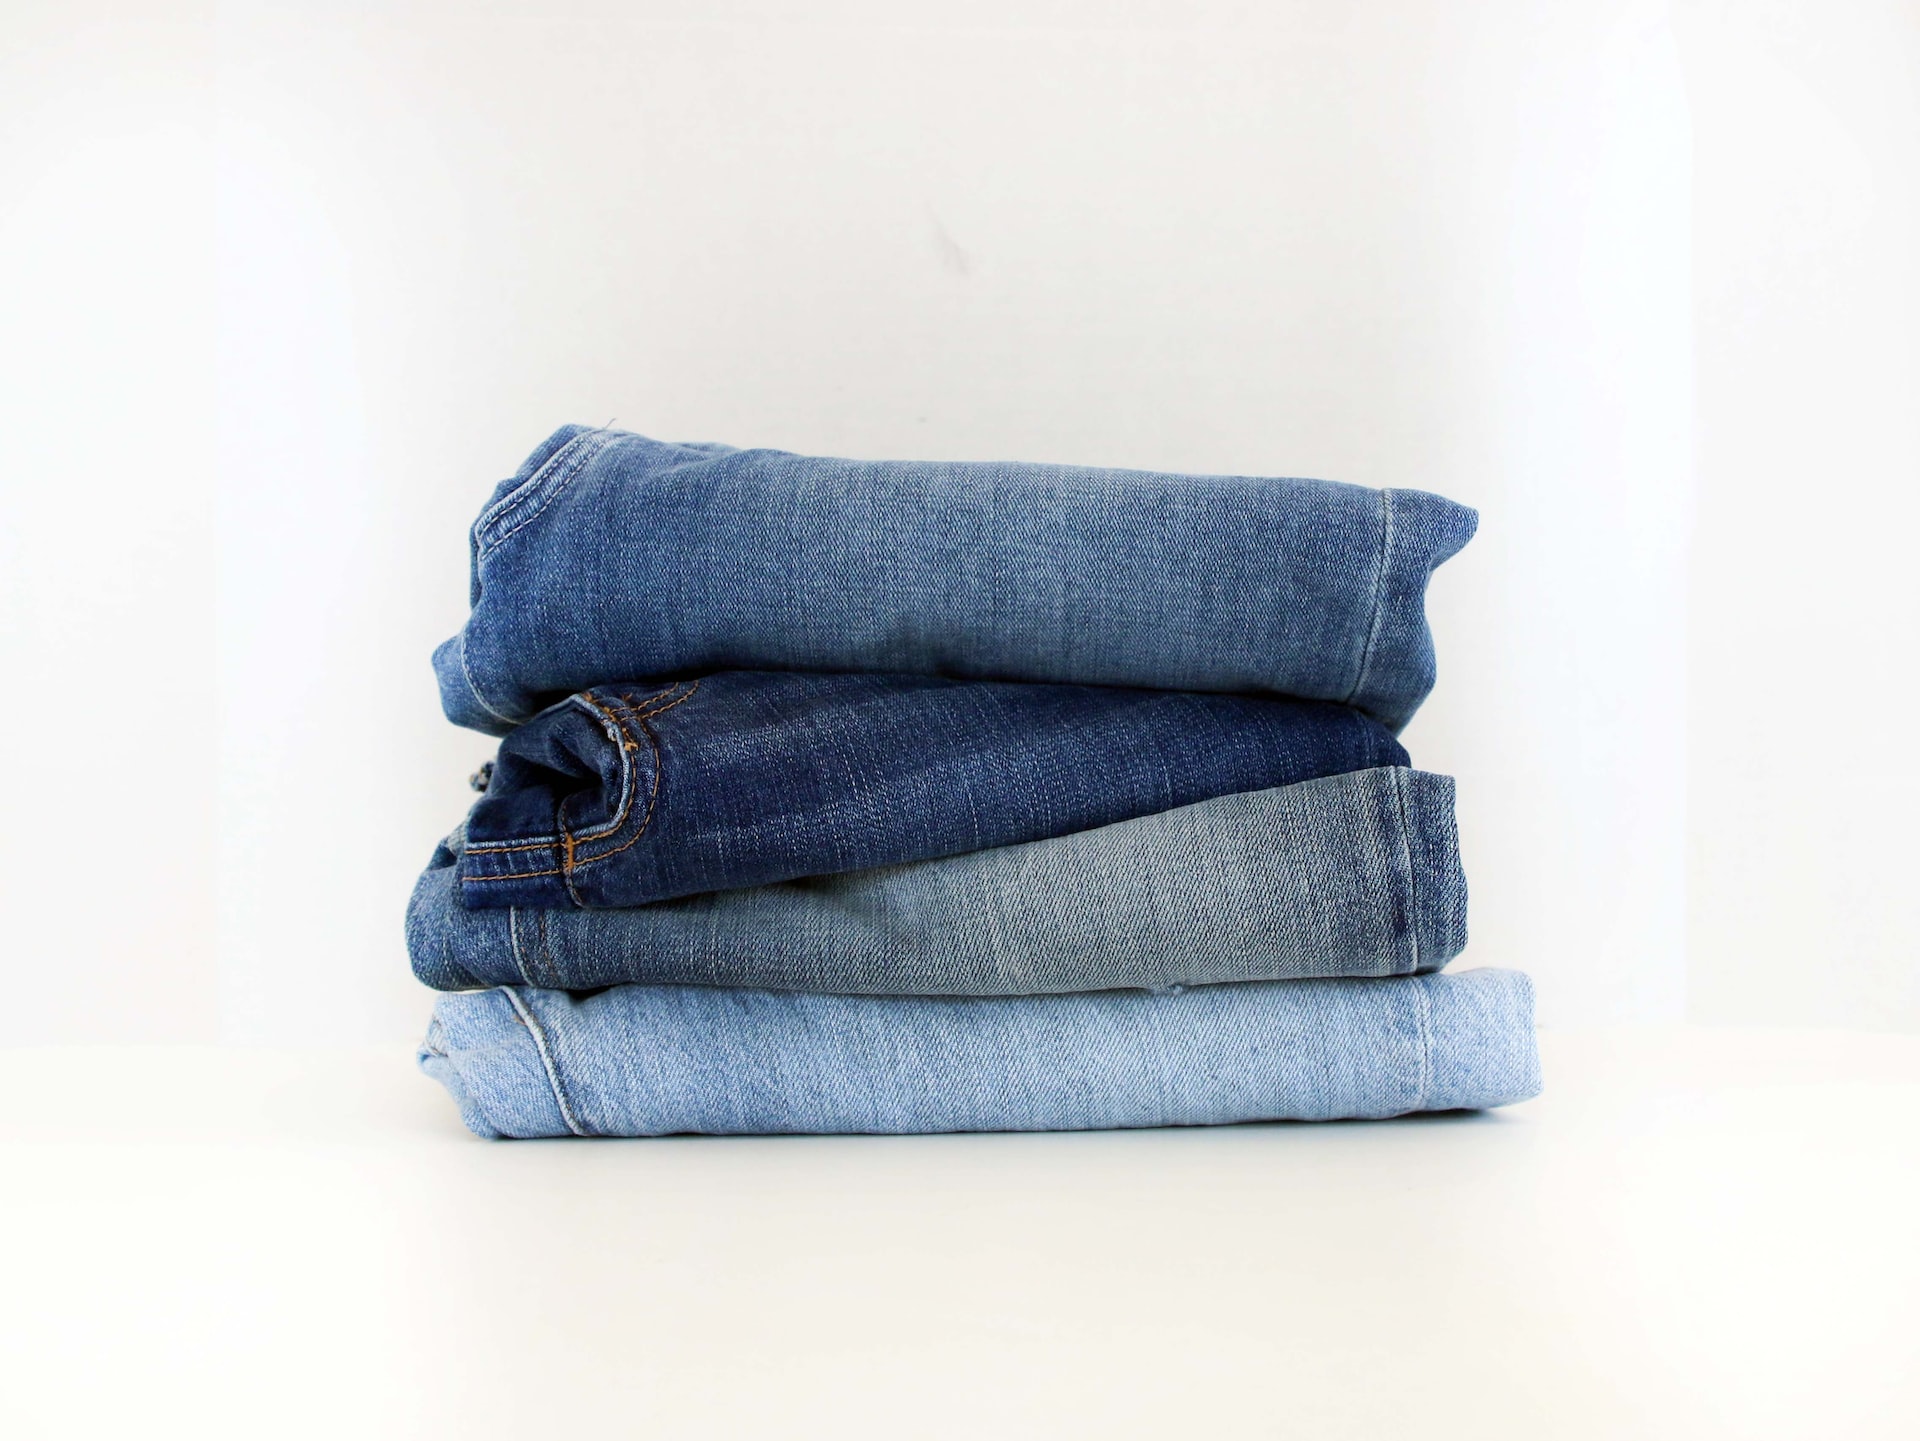 A stock image of some jeans